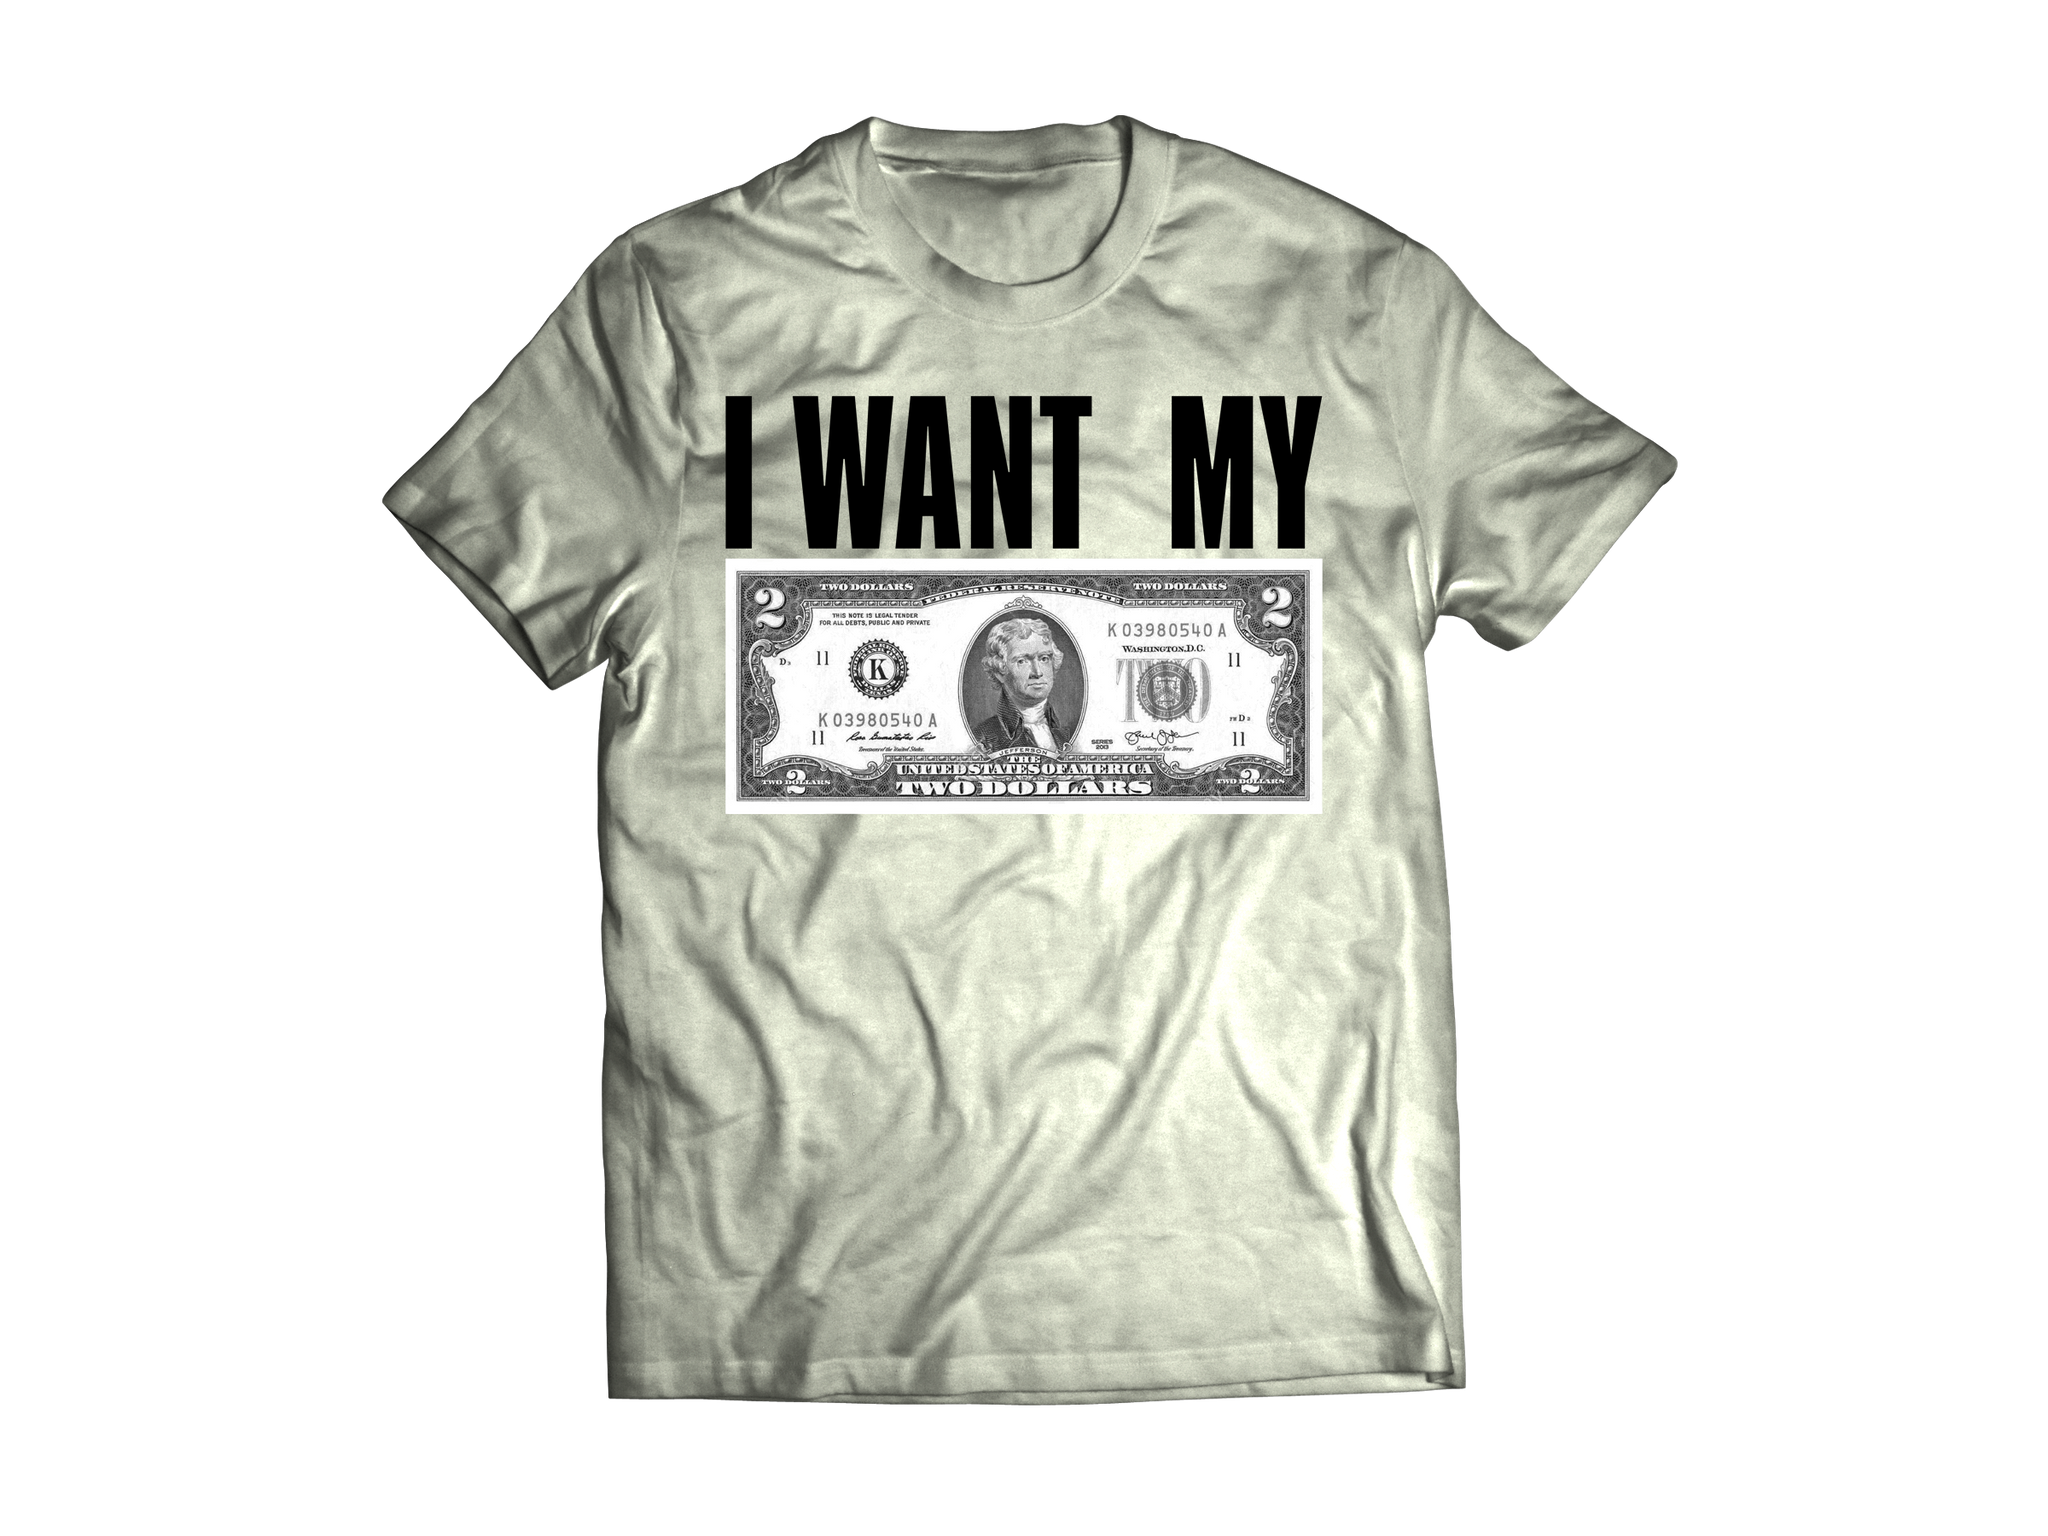 BETTER OFF DEAD "I WANT MY TWO DOLLARS" OFF WHITE T-SHIRT